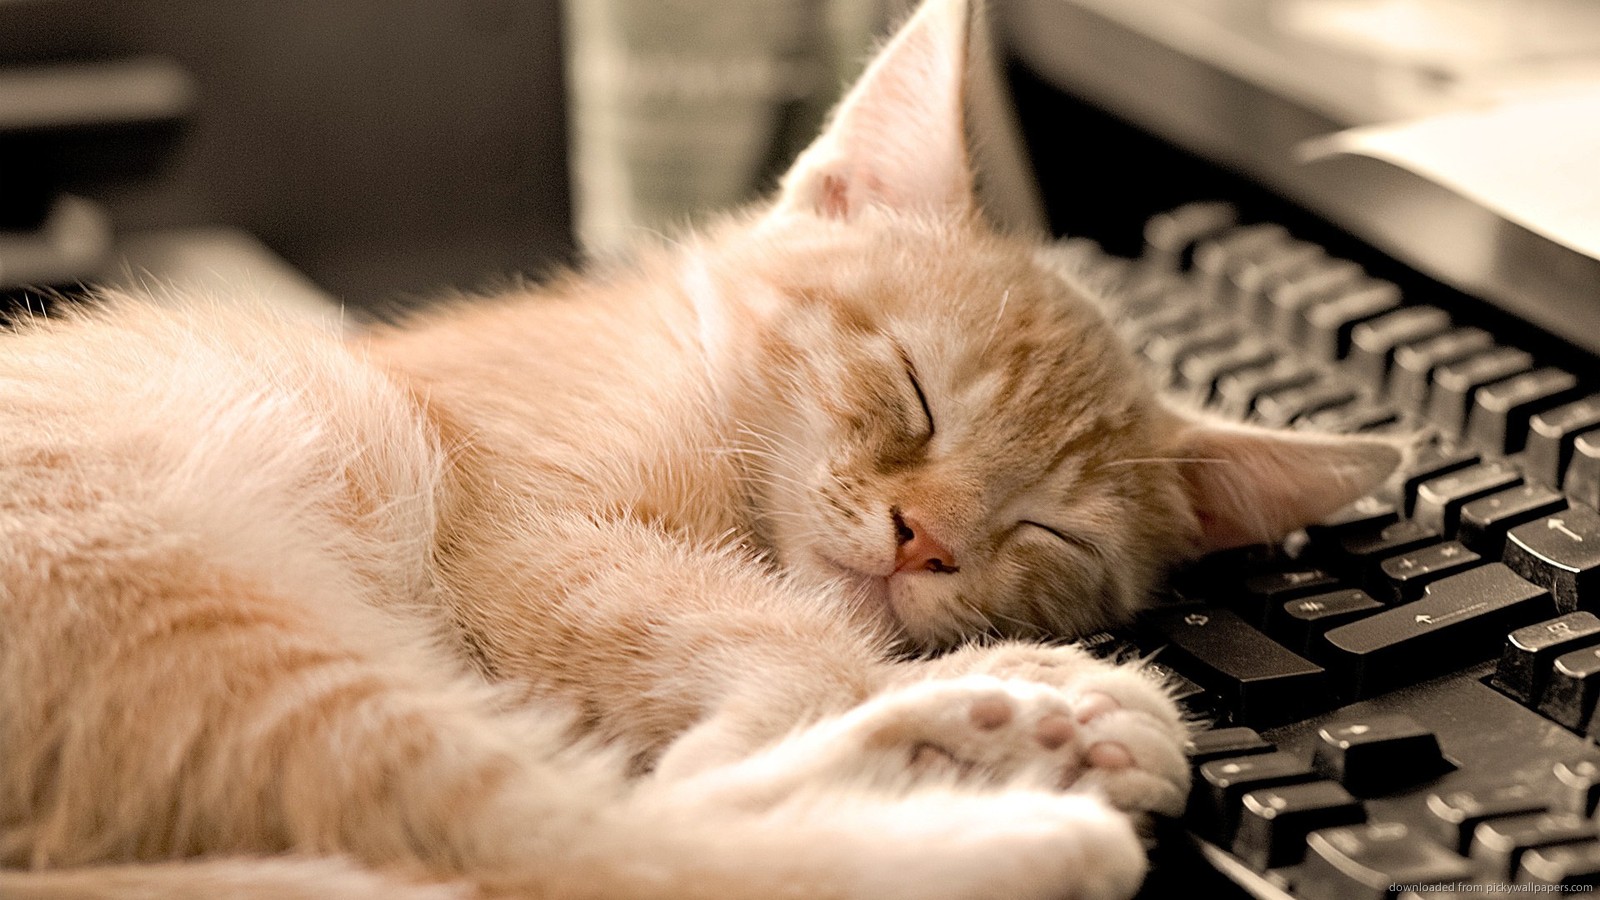 cat napping on a keyboard